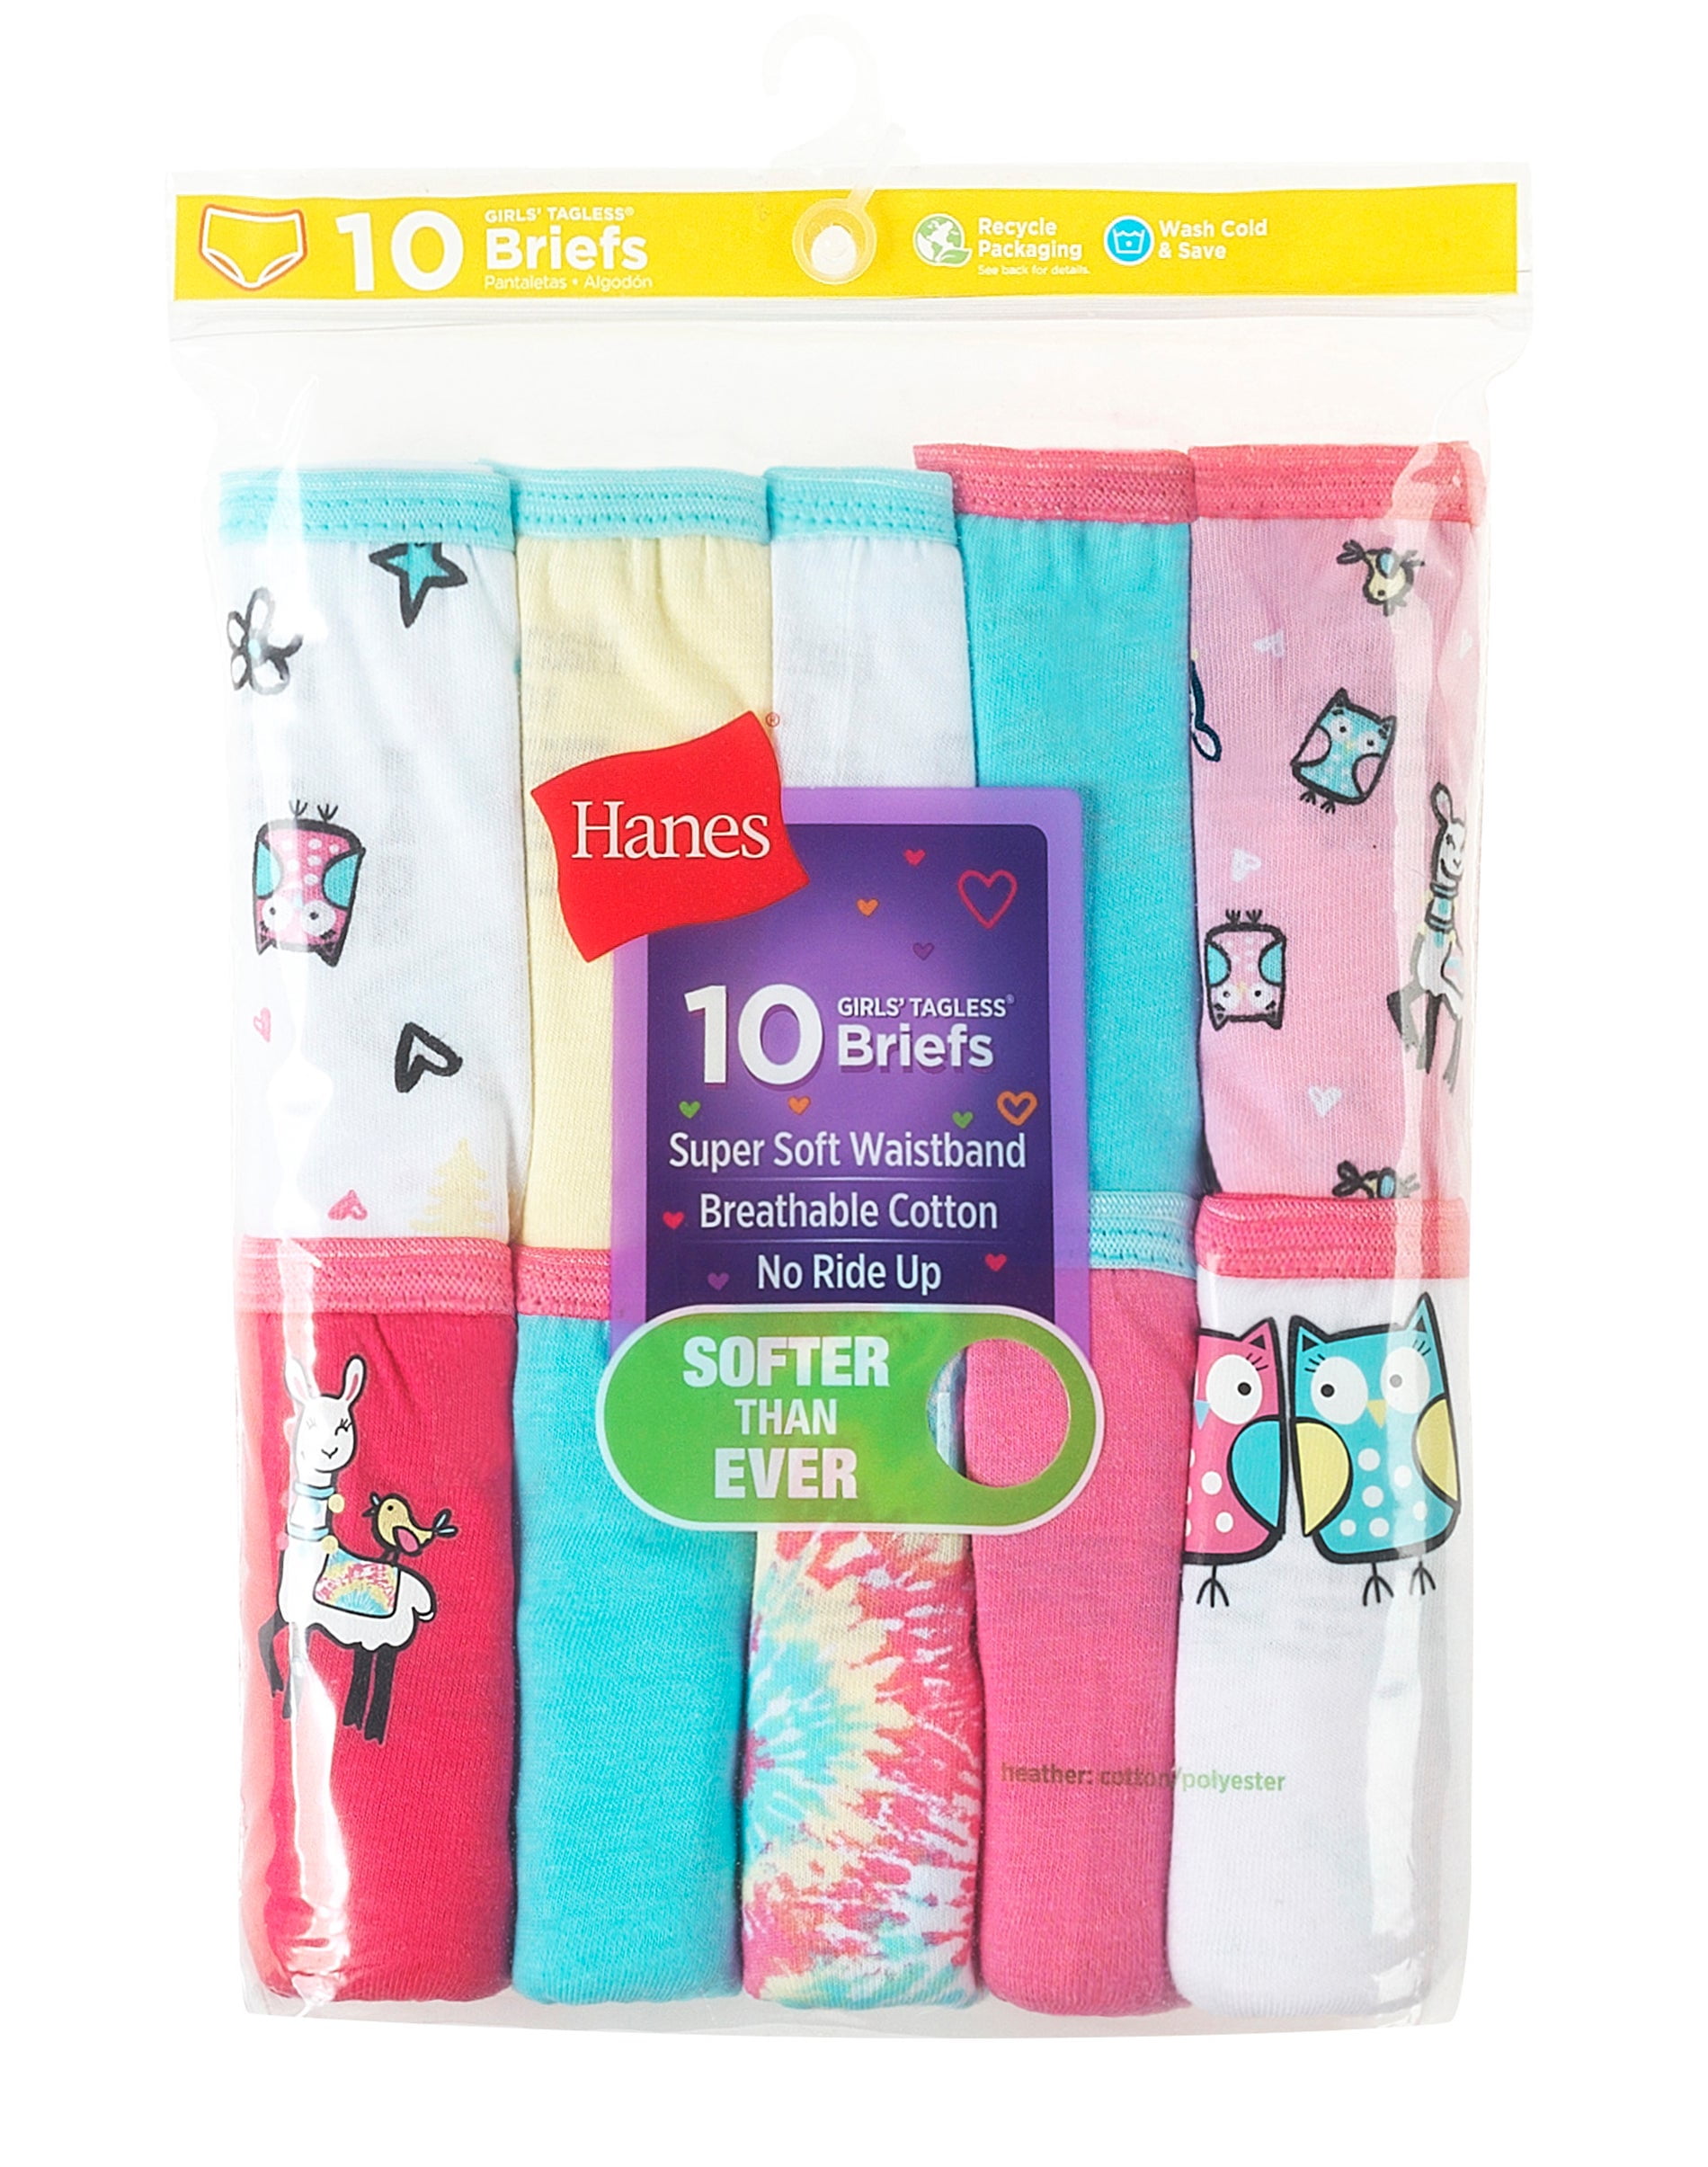 Hanes Girls' Cotton Briefs, 10-Pack Assorted 1 14 - image 1 of 4